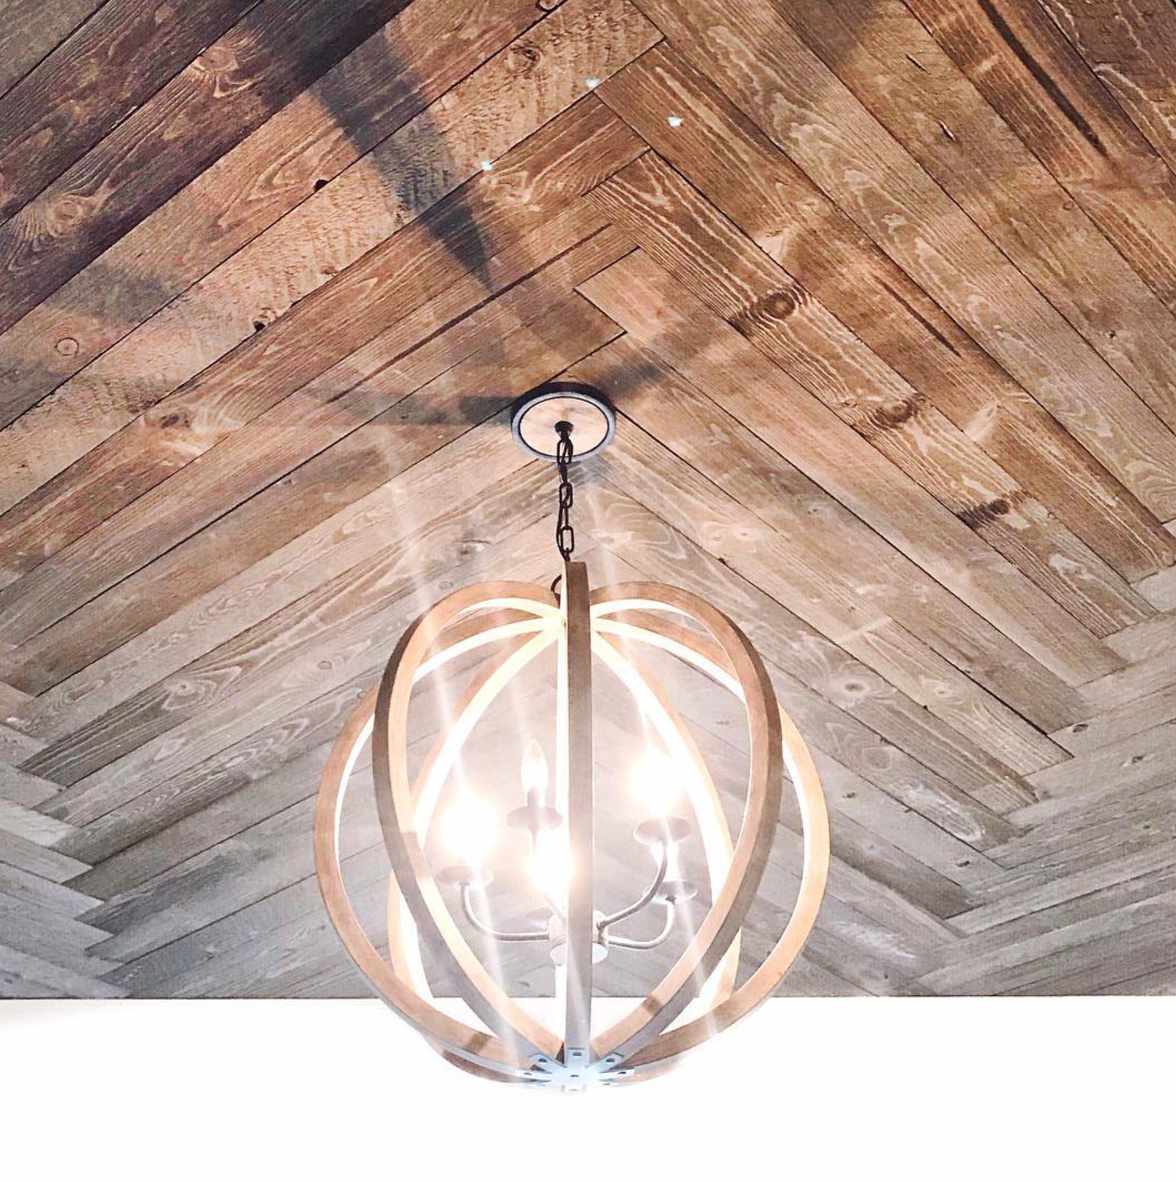 chevron planked ceiling